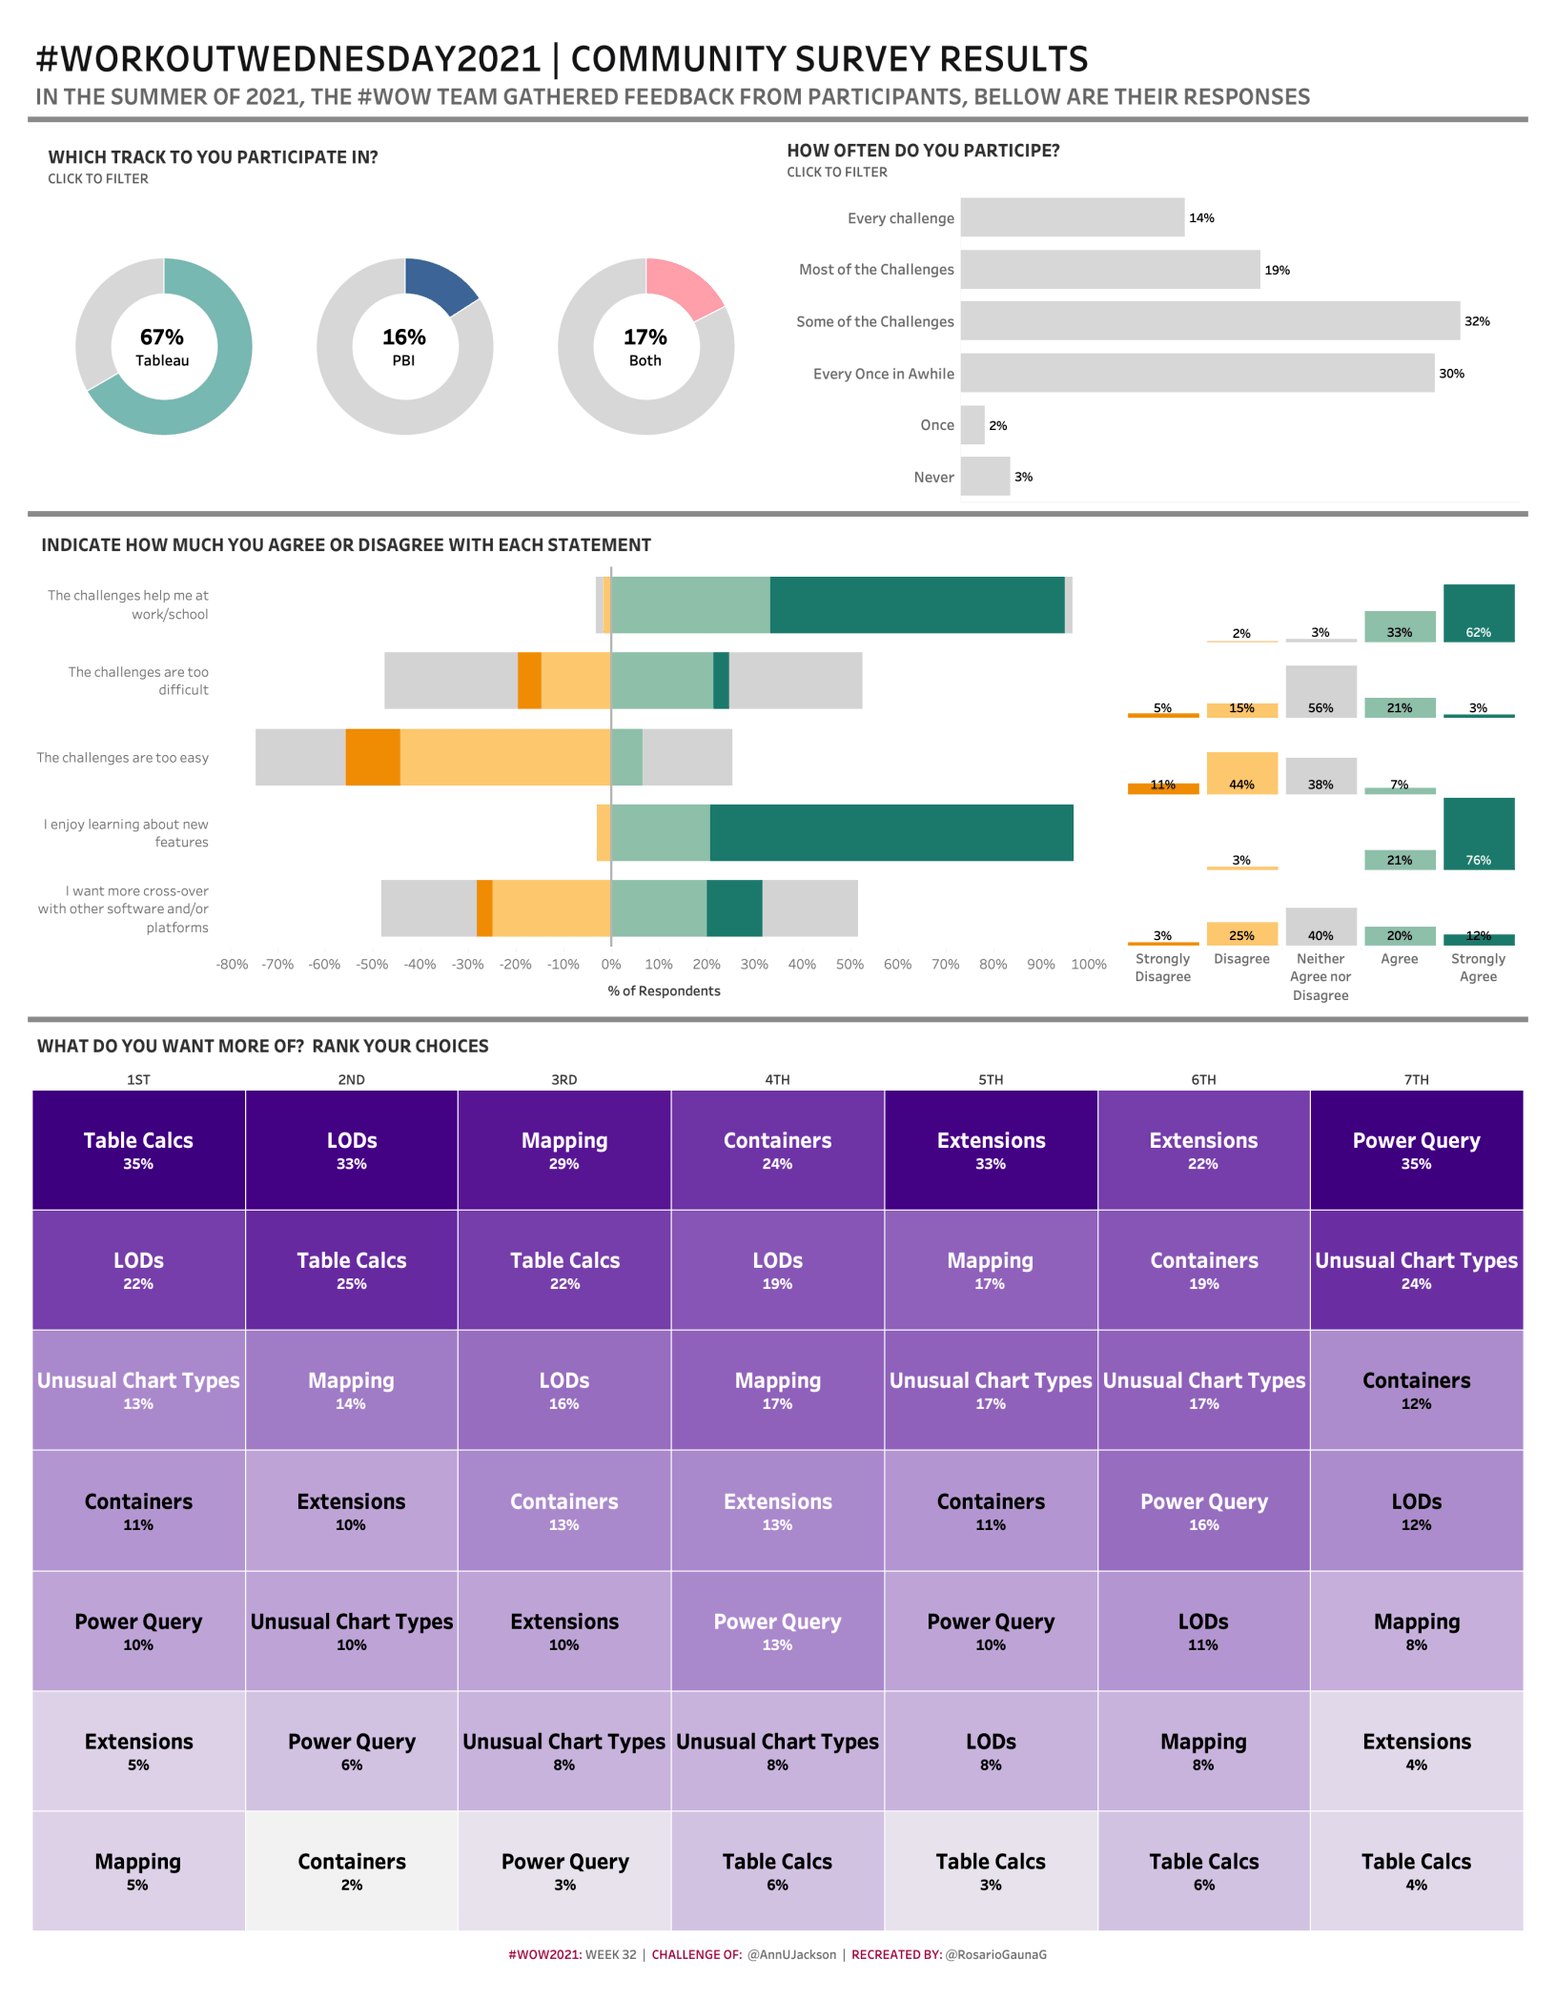 Data dashboard with donut charts, bar charts, divergent bar charts, and heatmaps, visualizing community survey responses